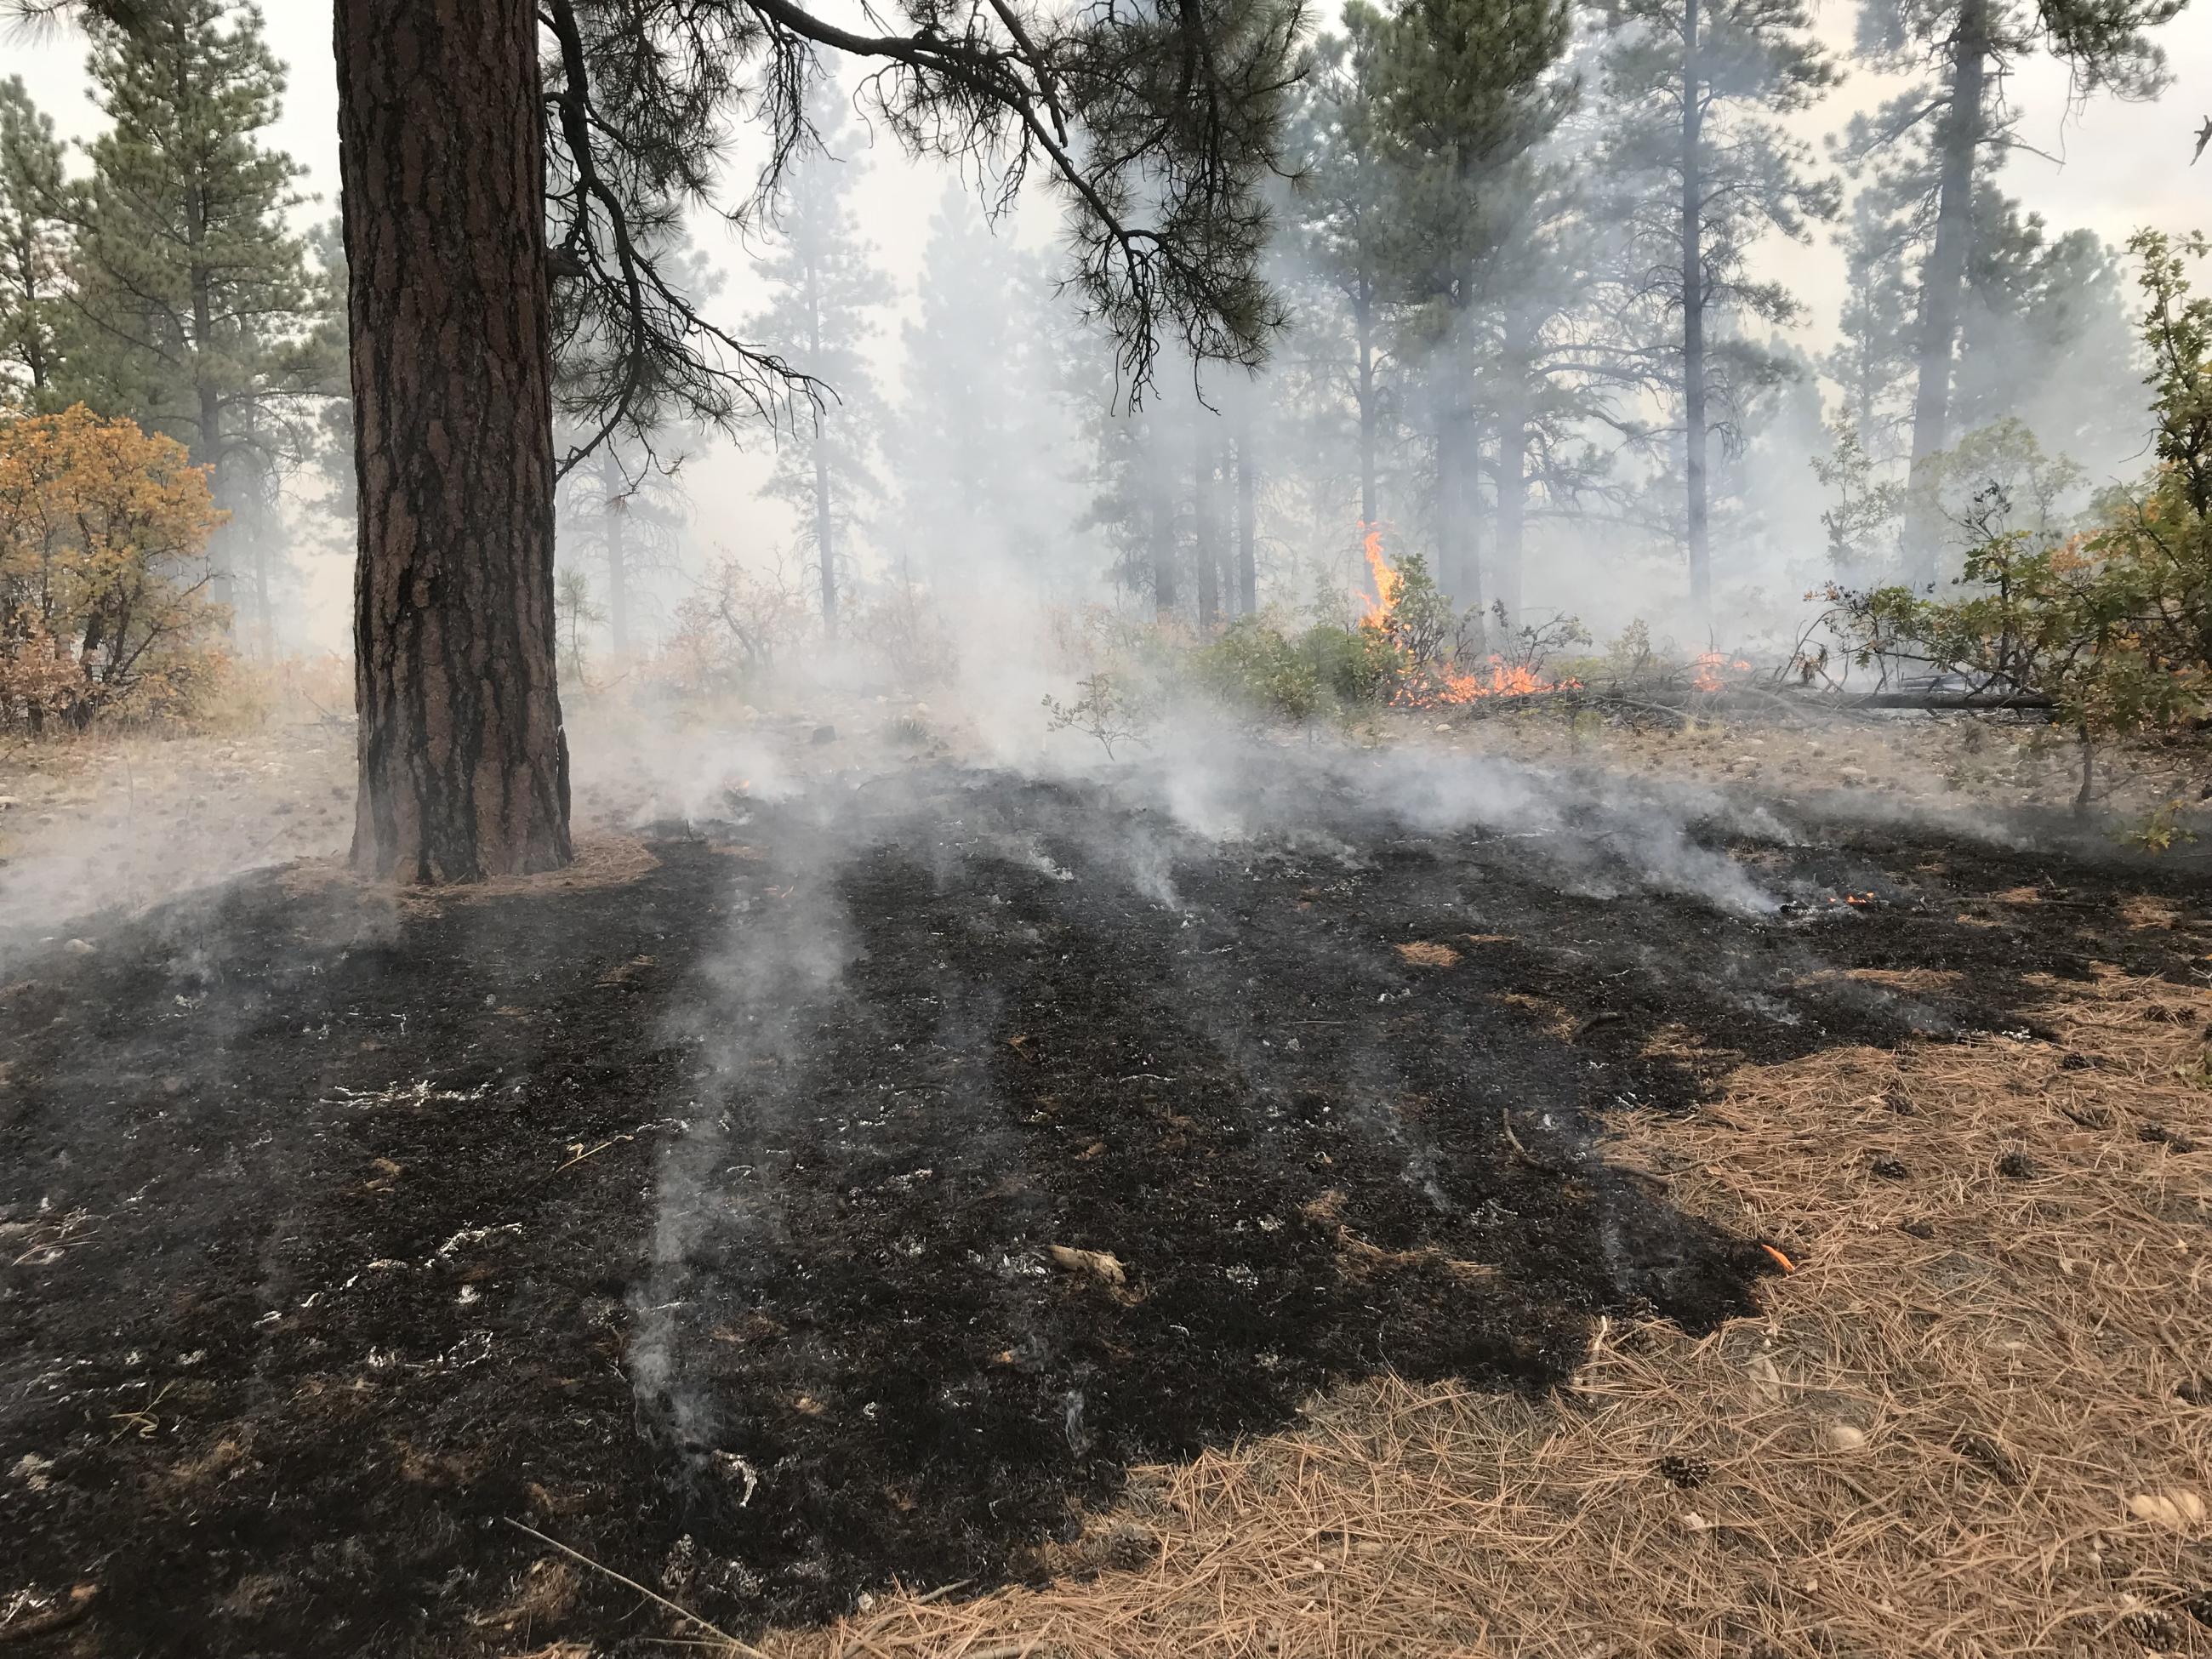 Fire smolders in pine needles in the understory of pine forest. Some flames lick brush in the background.